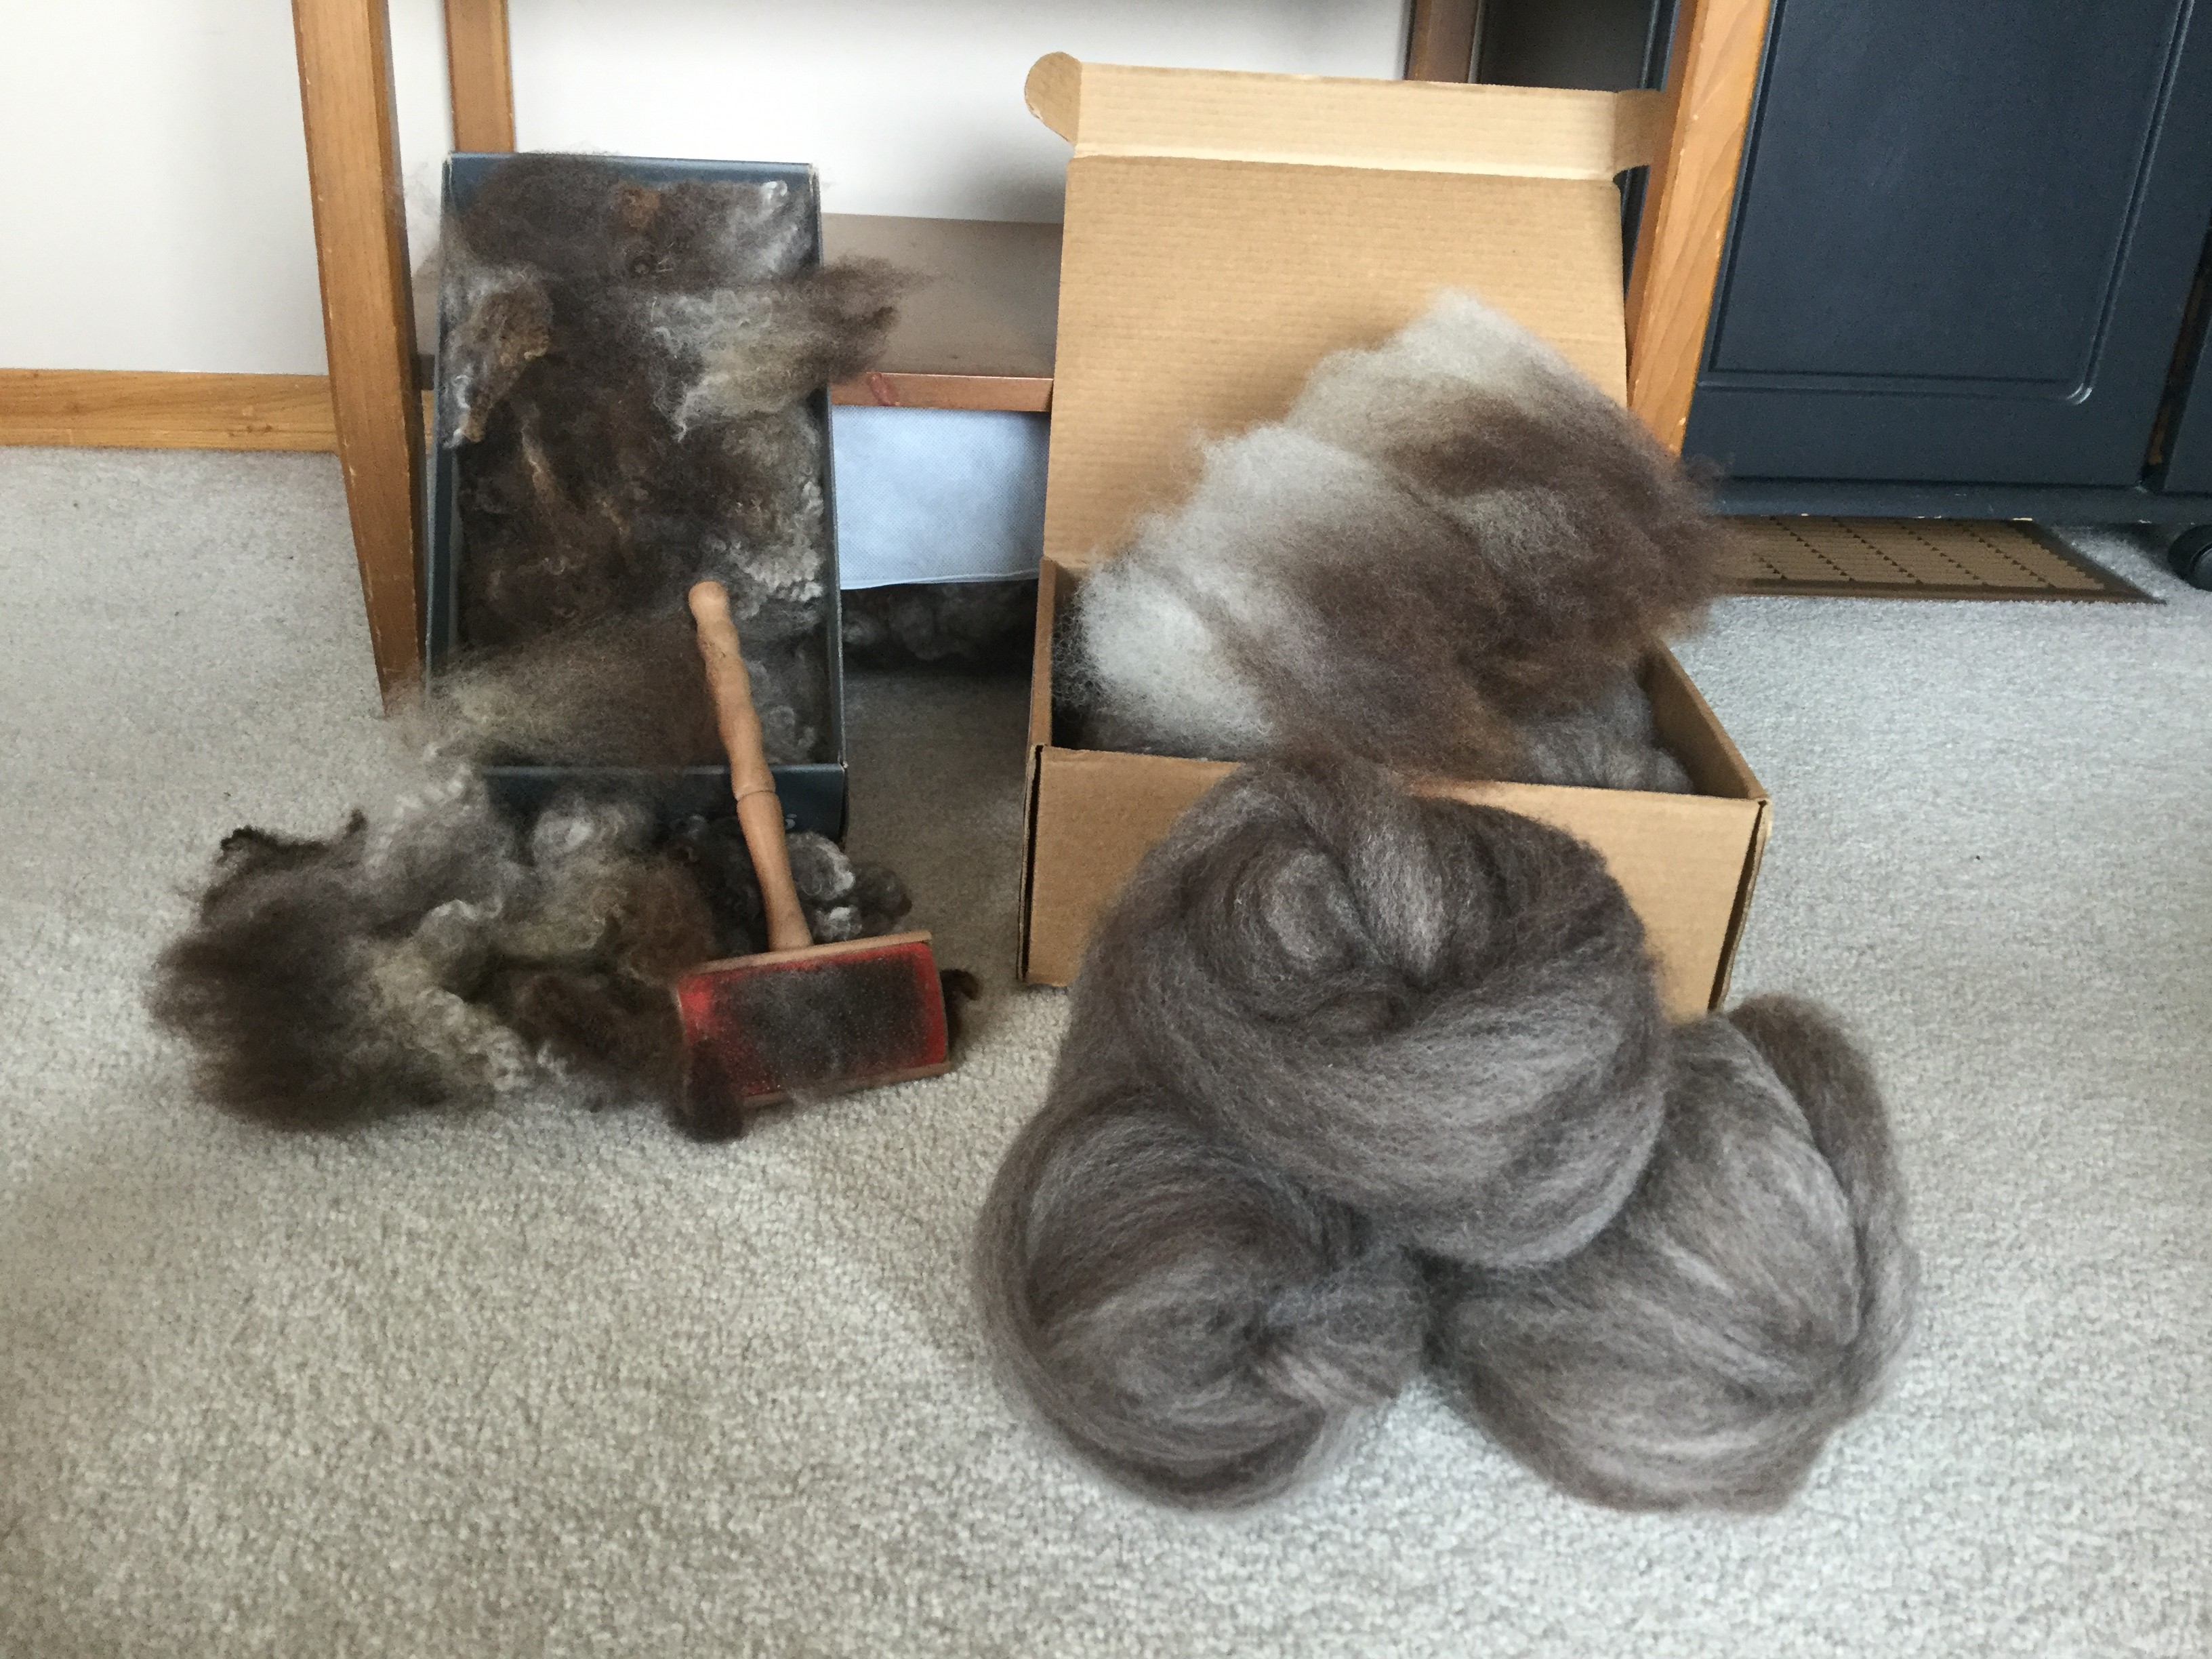 Grace - Romney X locks that are flicked, butt and tip then put through the drum carder tip end first.  The fibre is then dized off to produce a roving.  